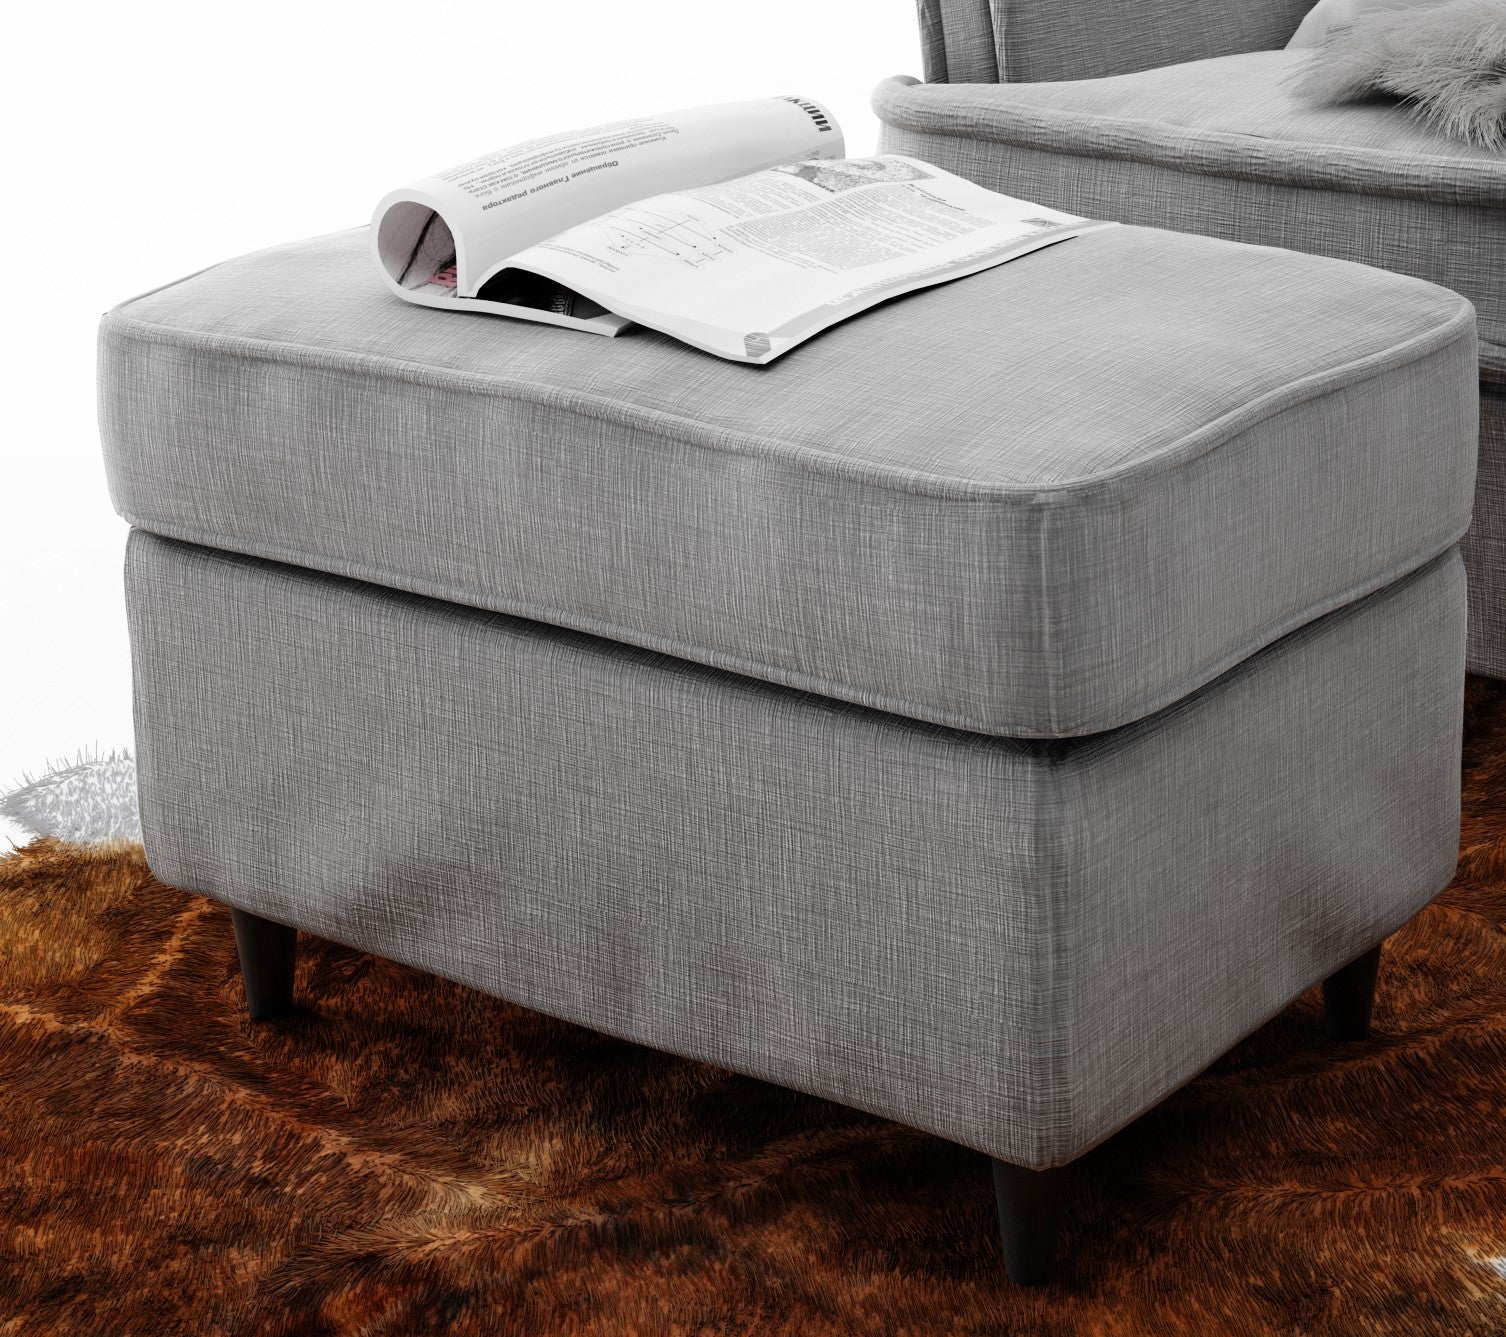 Blanket Box: A Functional and Stylish Storage Solution in the UK